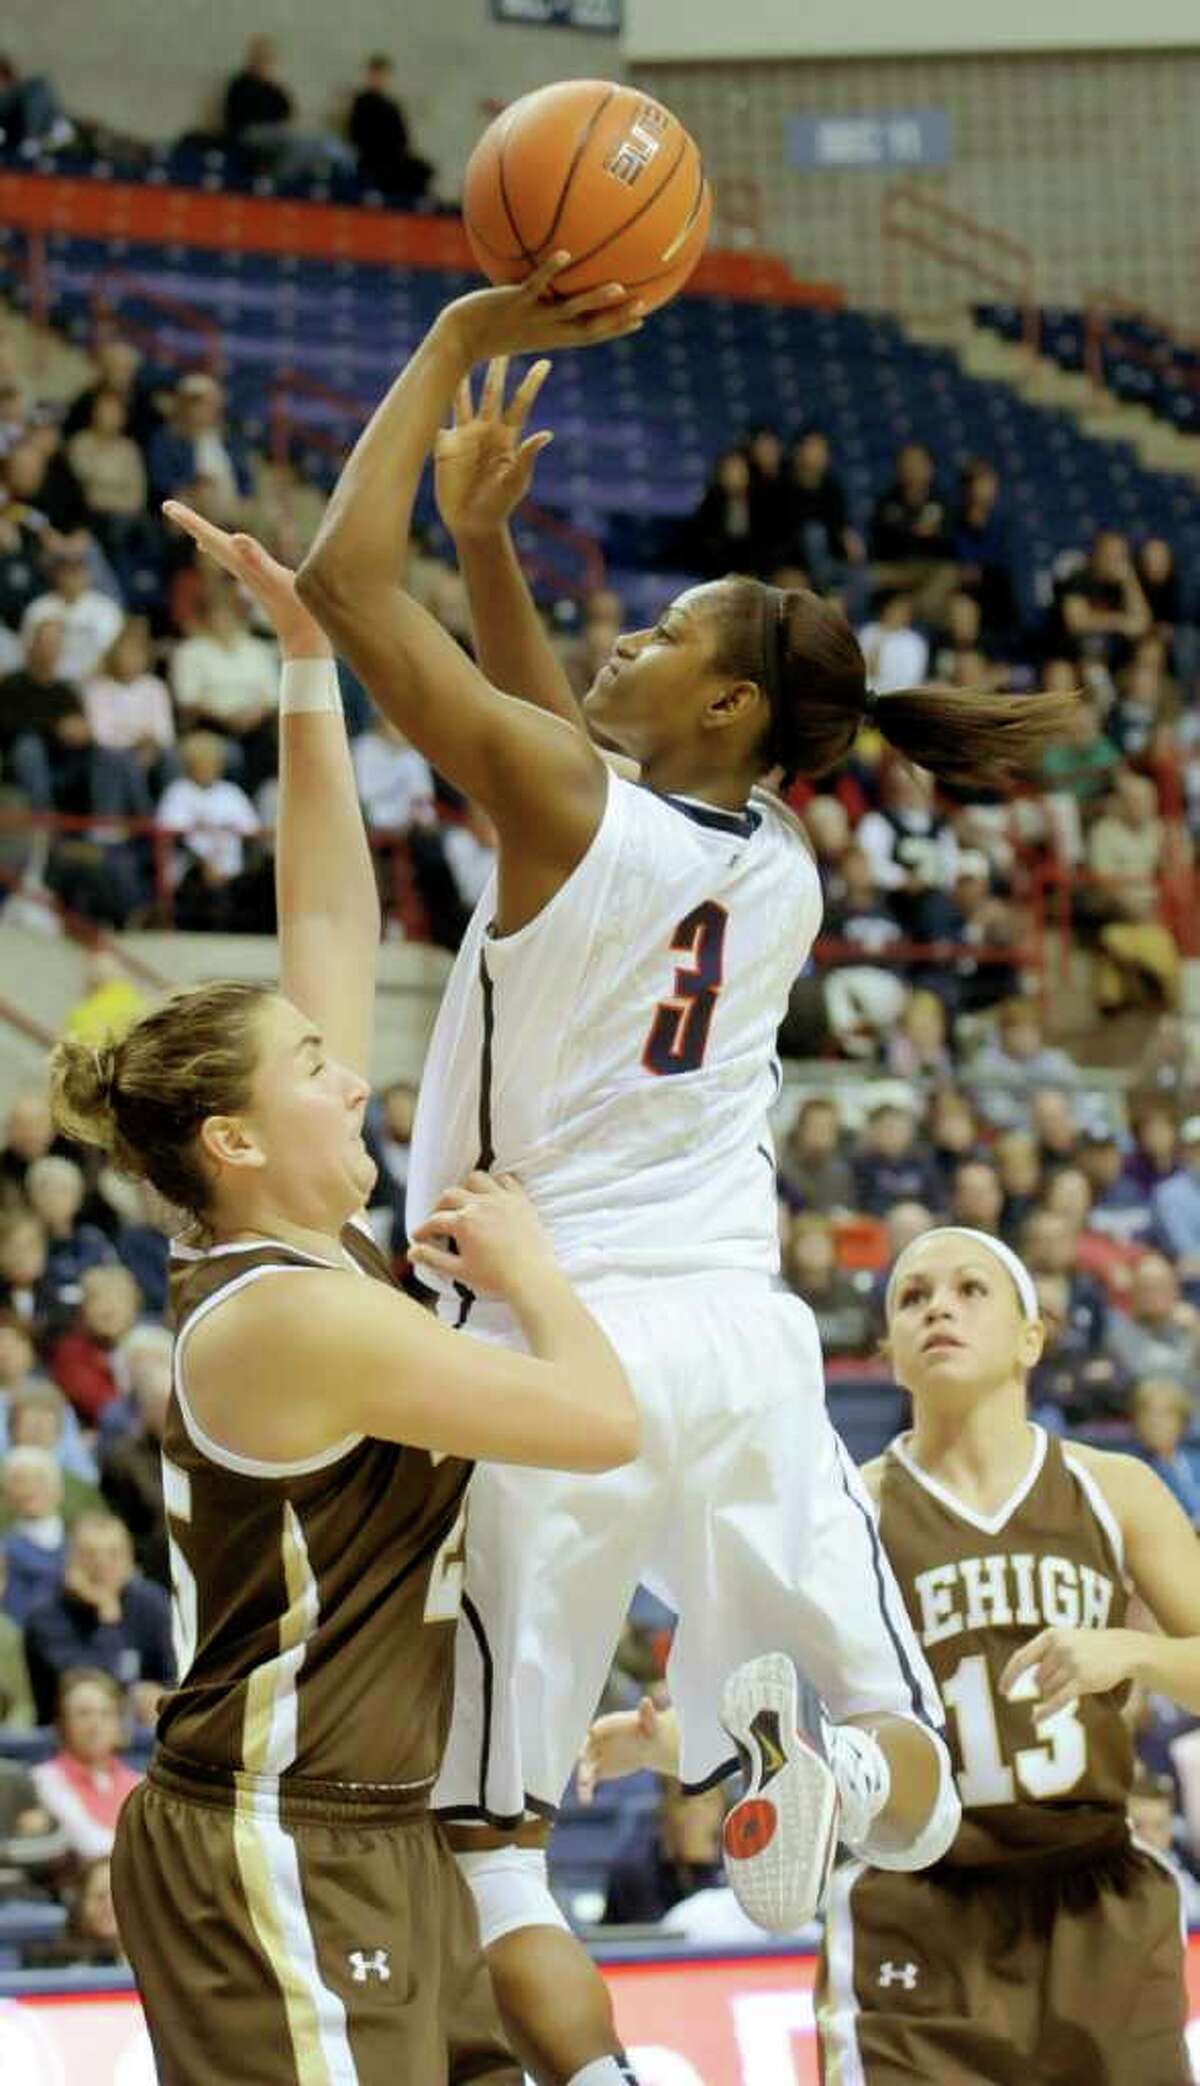 Connecticut's Tiffany Hayes (3) takes a jump shot over Lehigh's Kristen Dalton during the second half of an NCAA college basketball game at Storrs, Conn., Saturday, Nov. 27, 2010. UConn defeated Lehigh 81-38. (AP Photo/Bob Child)